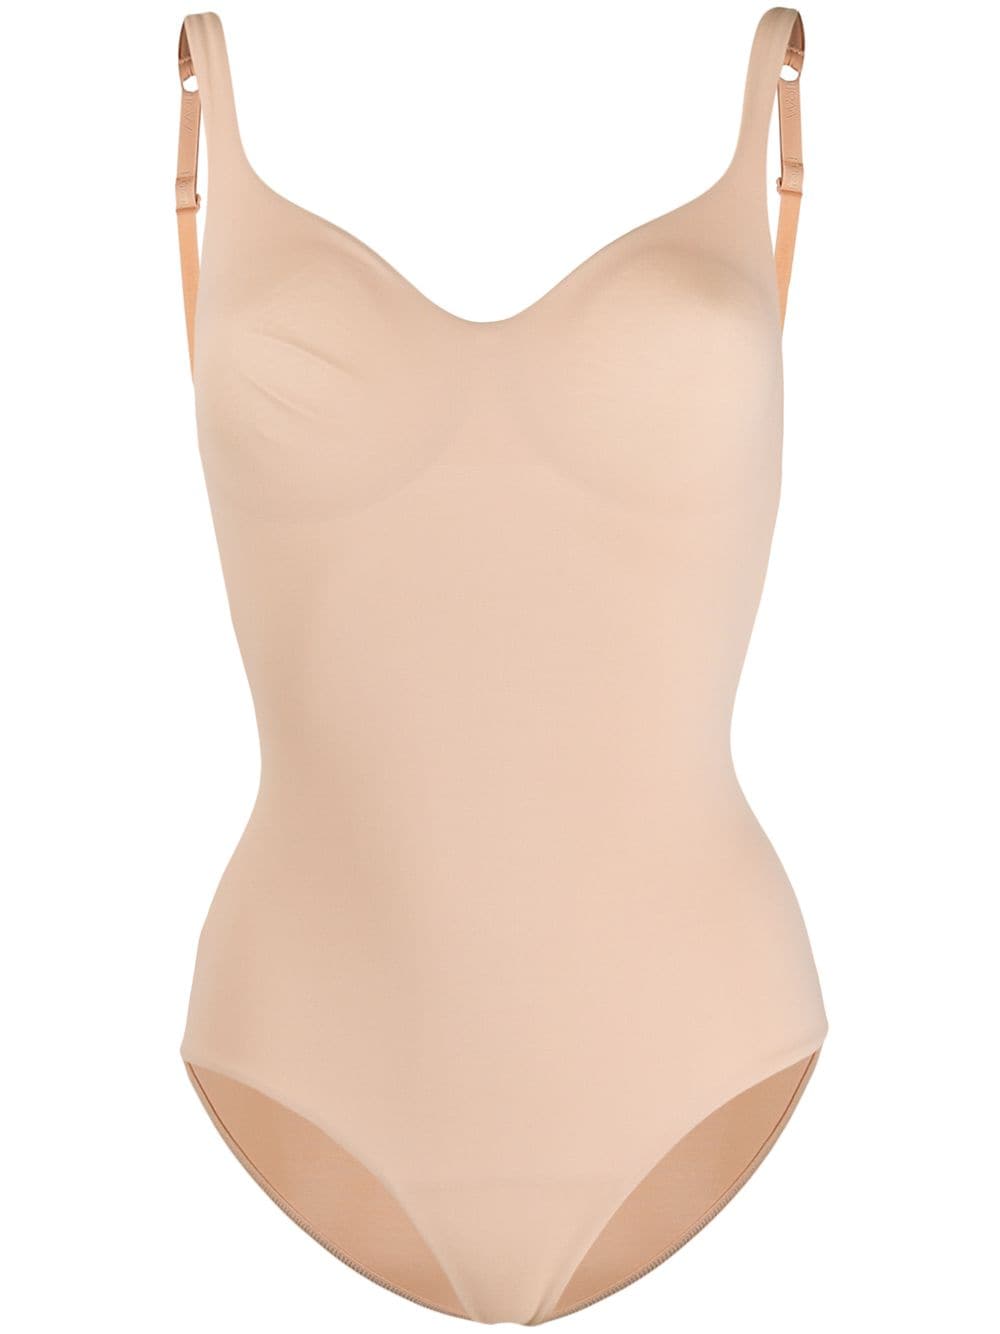 Wolford 'Mat de Luxe' Body - Nude von Wolford